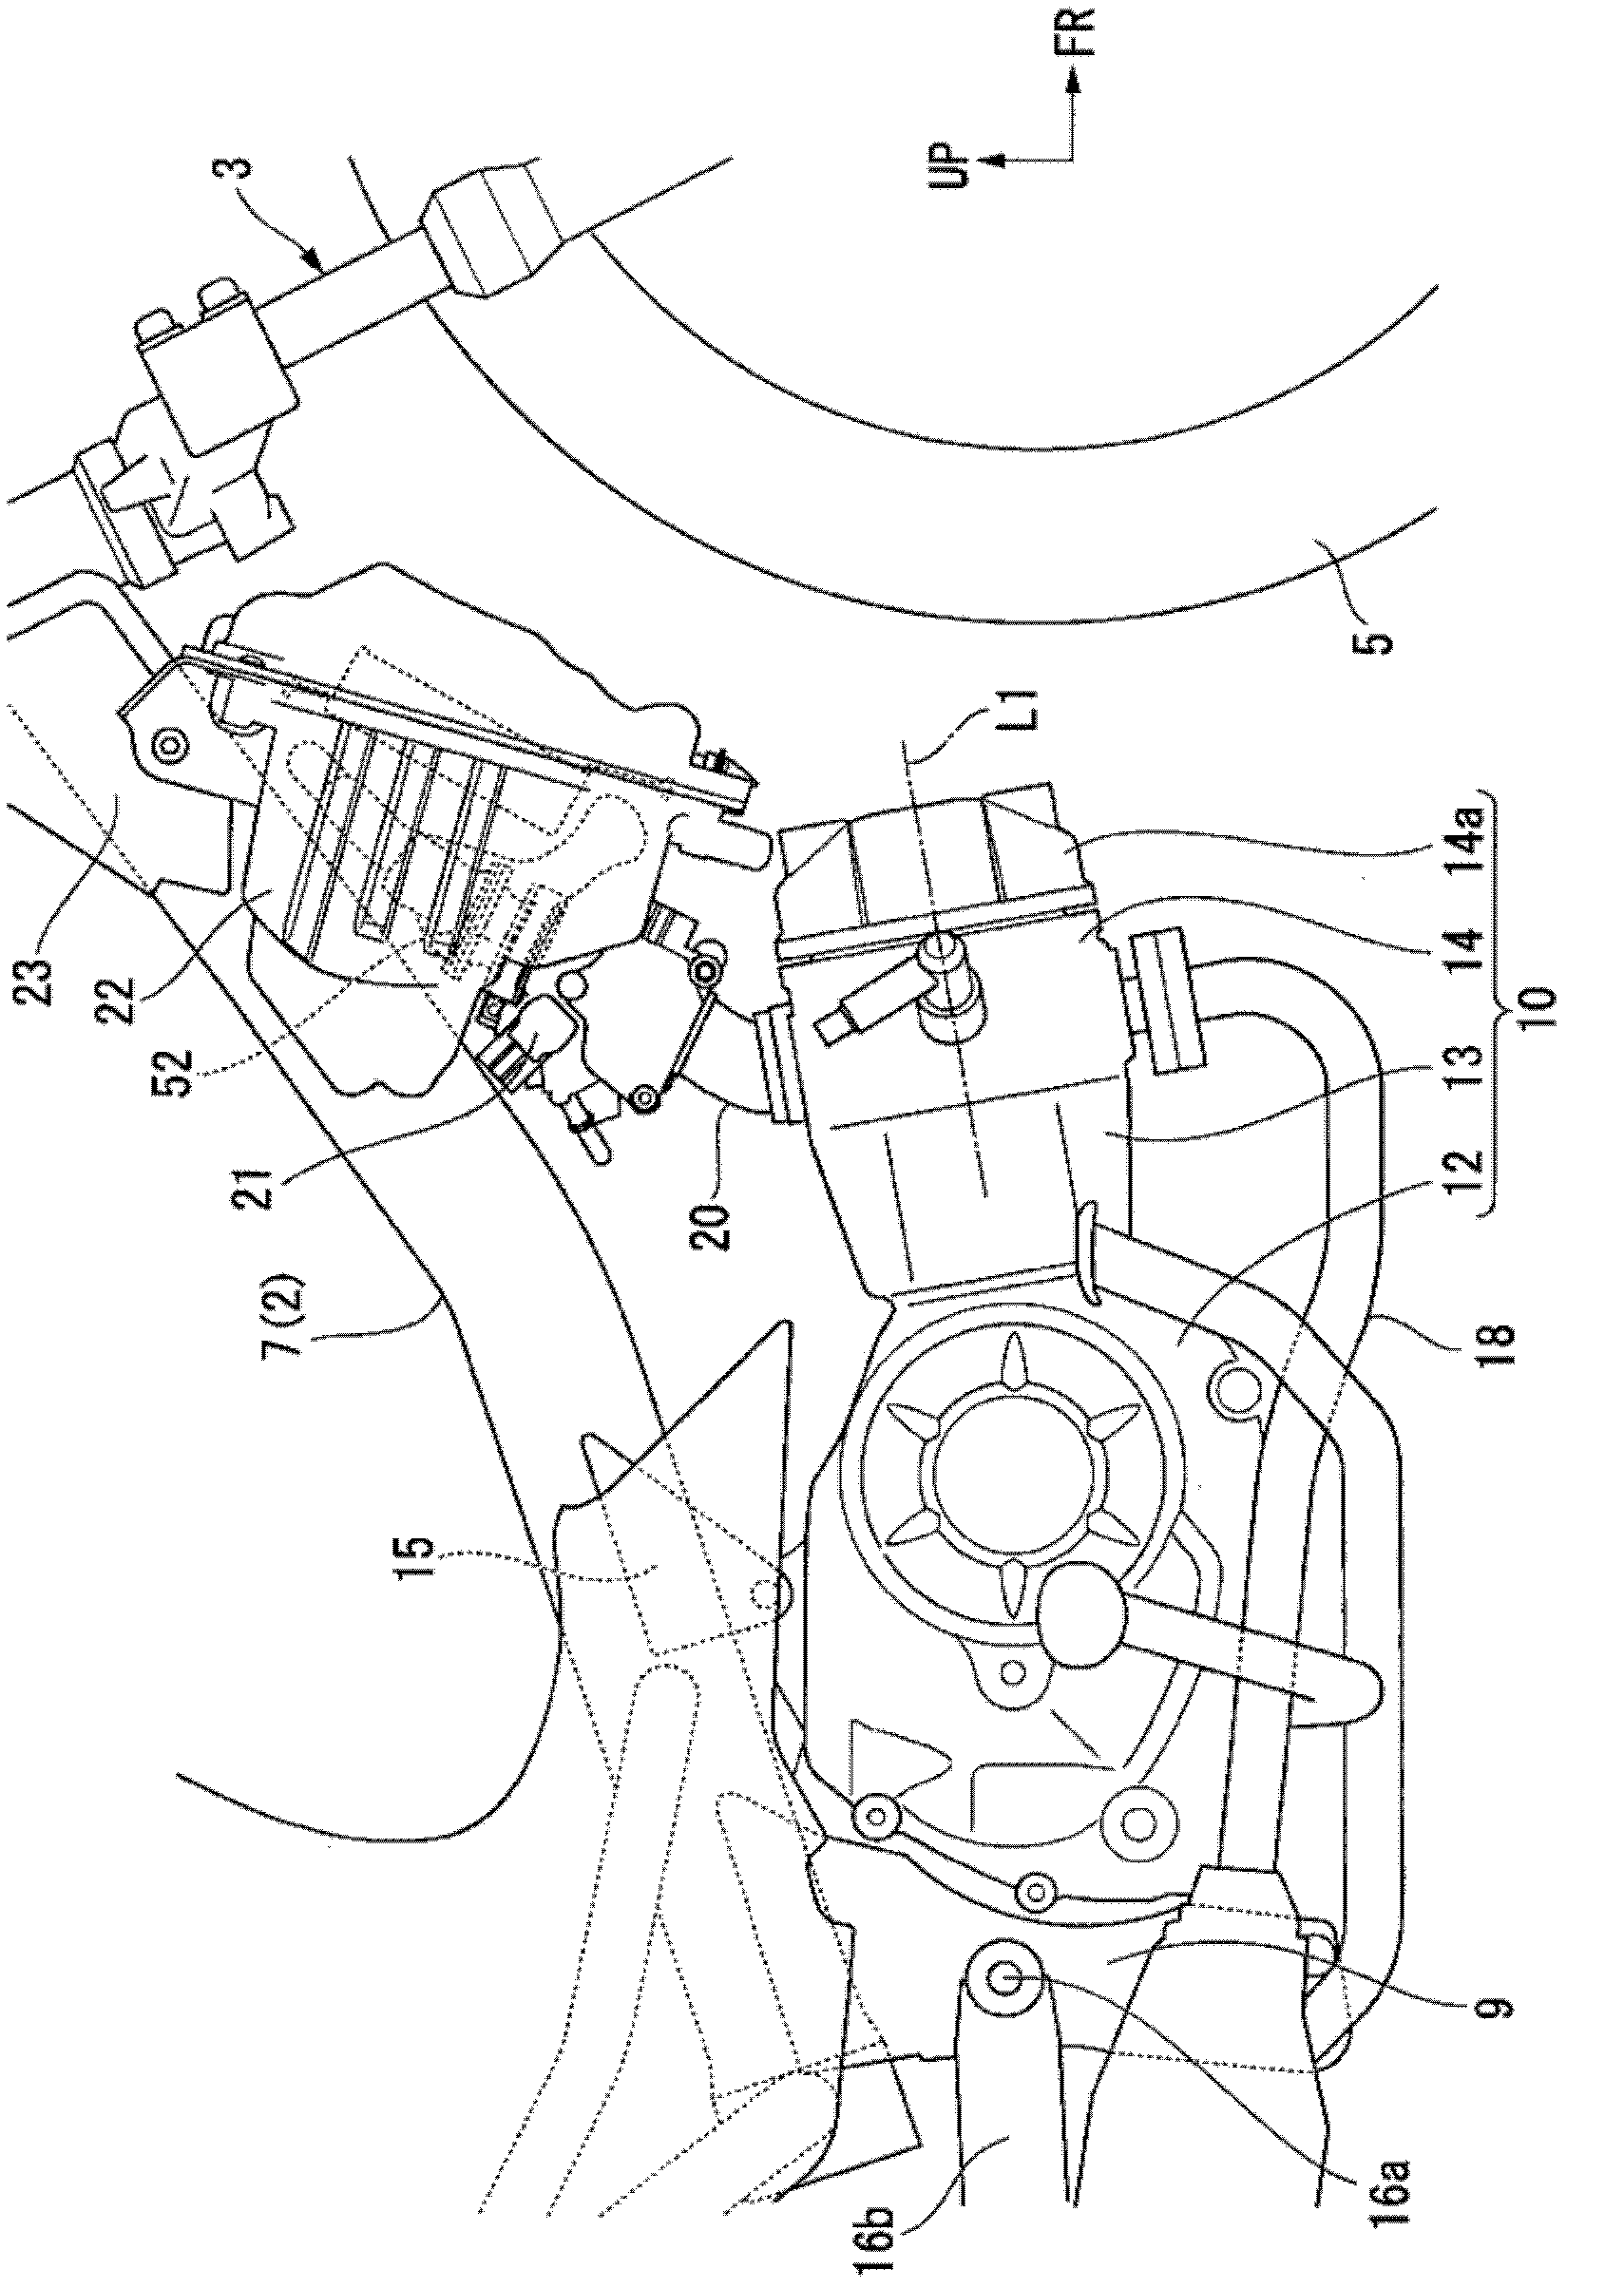 Intake device of internal combustion engine